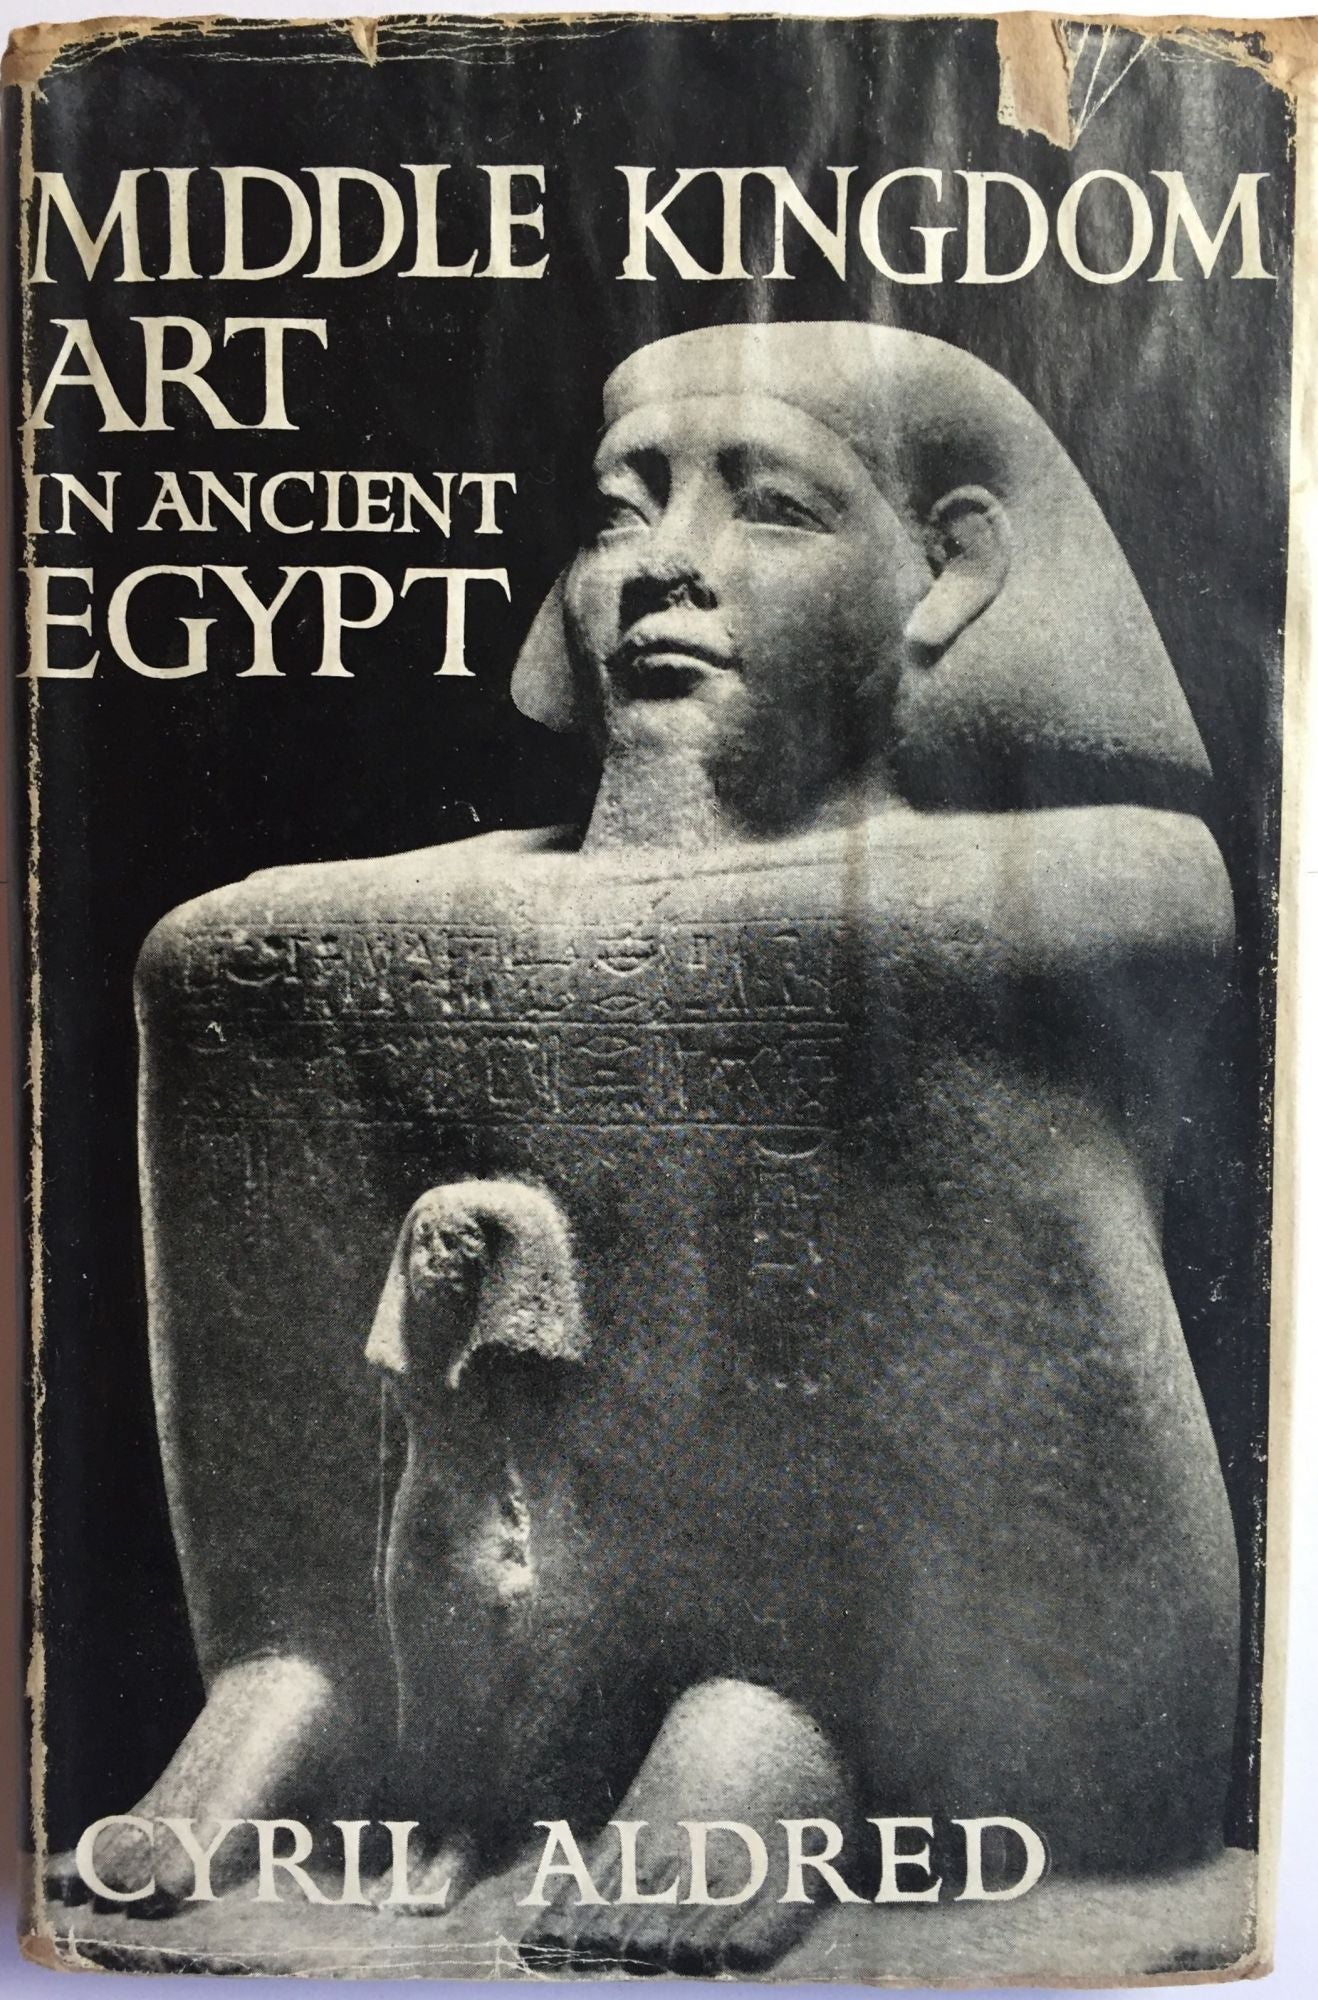 Middle Kingdom Art in Ancient Egypt, 2300-1500 B.C. | ALDRED Cyril